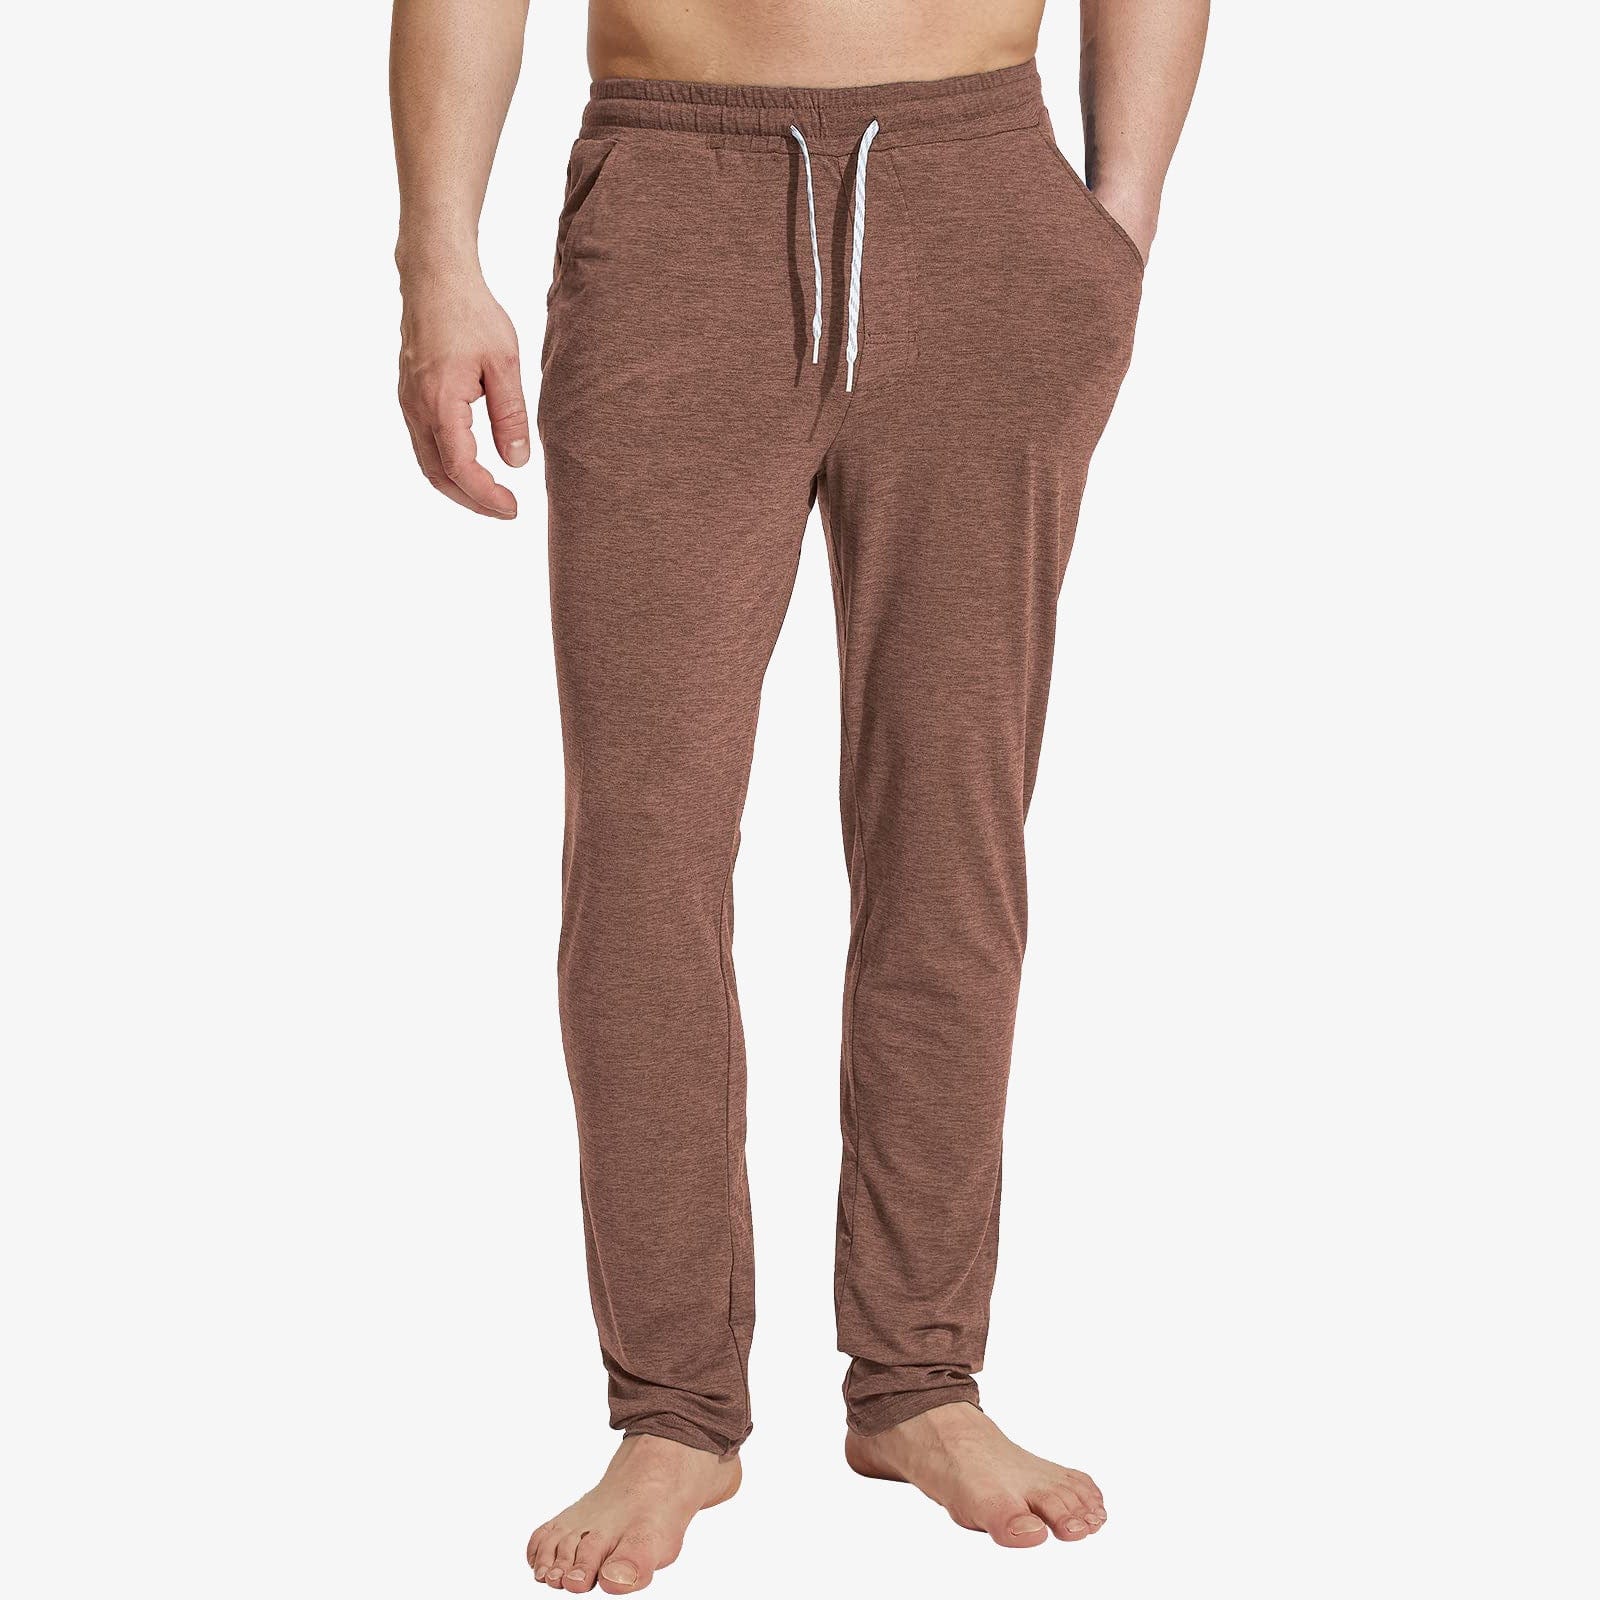 Men Lightweight Soft Athletic Track Pants with Pockets Open Bottom Men Train Pants Brown / S MIER